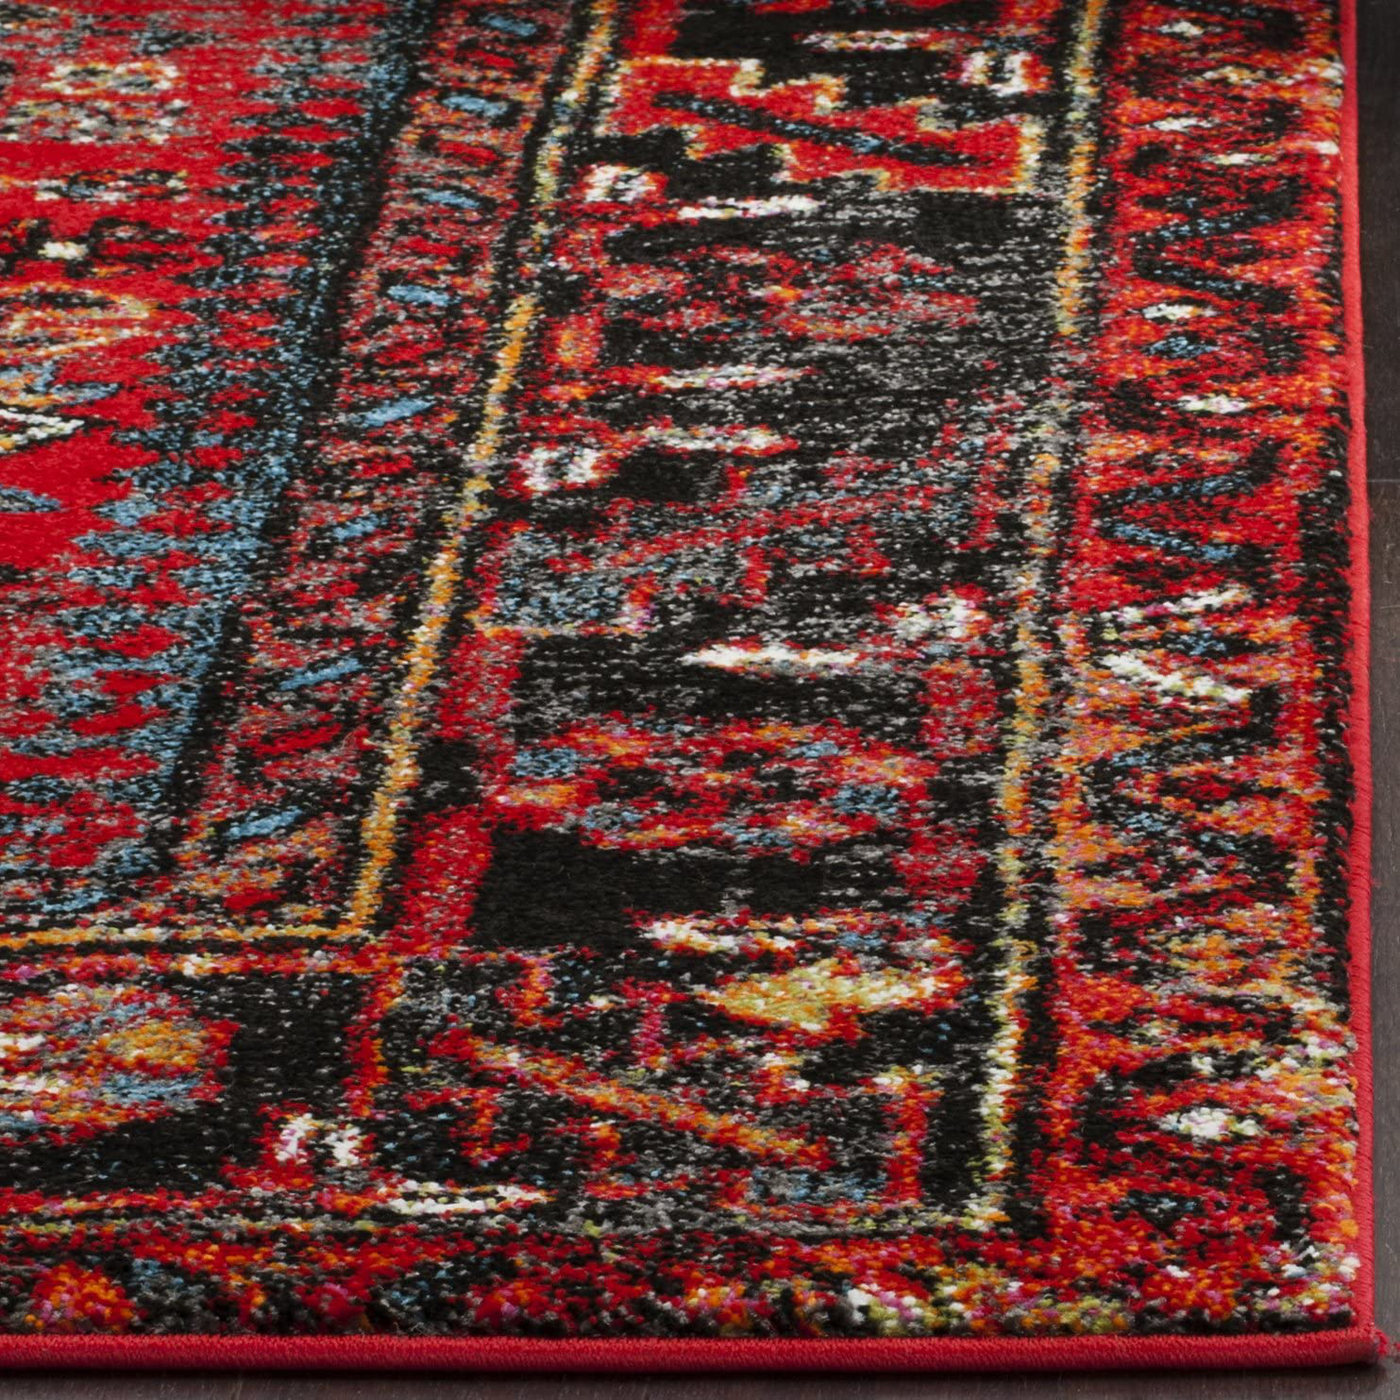 Safavieh Vintage Hamadan Collection VTH211Q Oriental Traditional Persian Non-Shedding Stain Resistant Living Room Bedroom Runner, 2'3" x 12' , Red / Light Blue